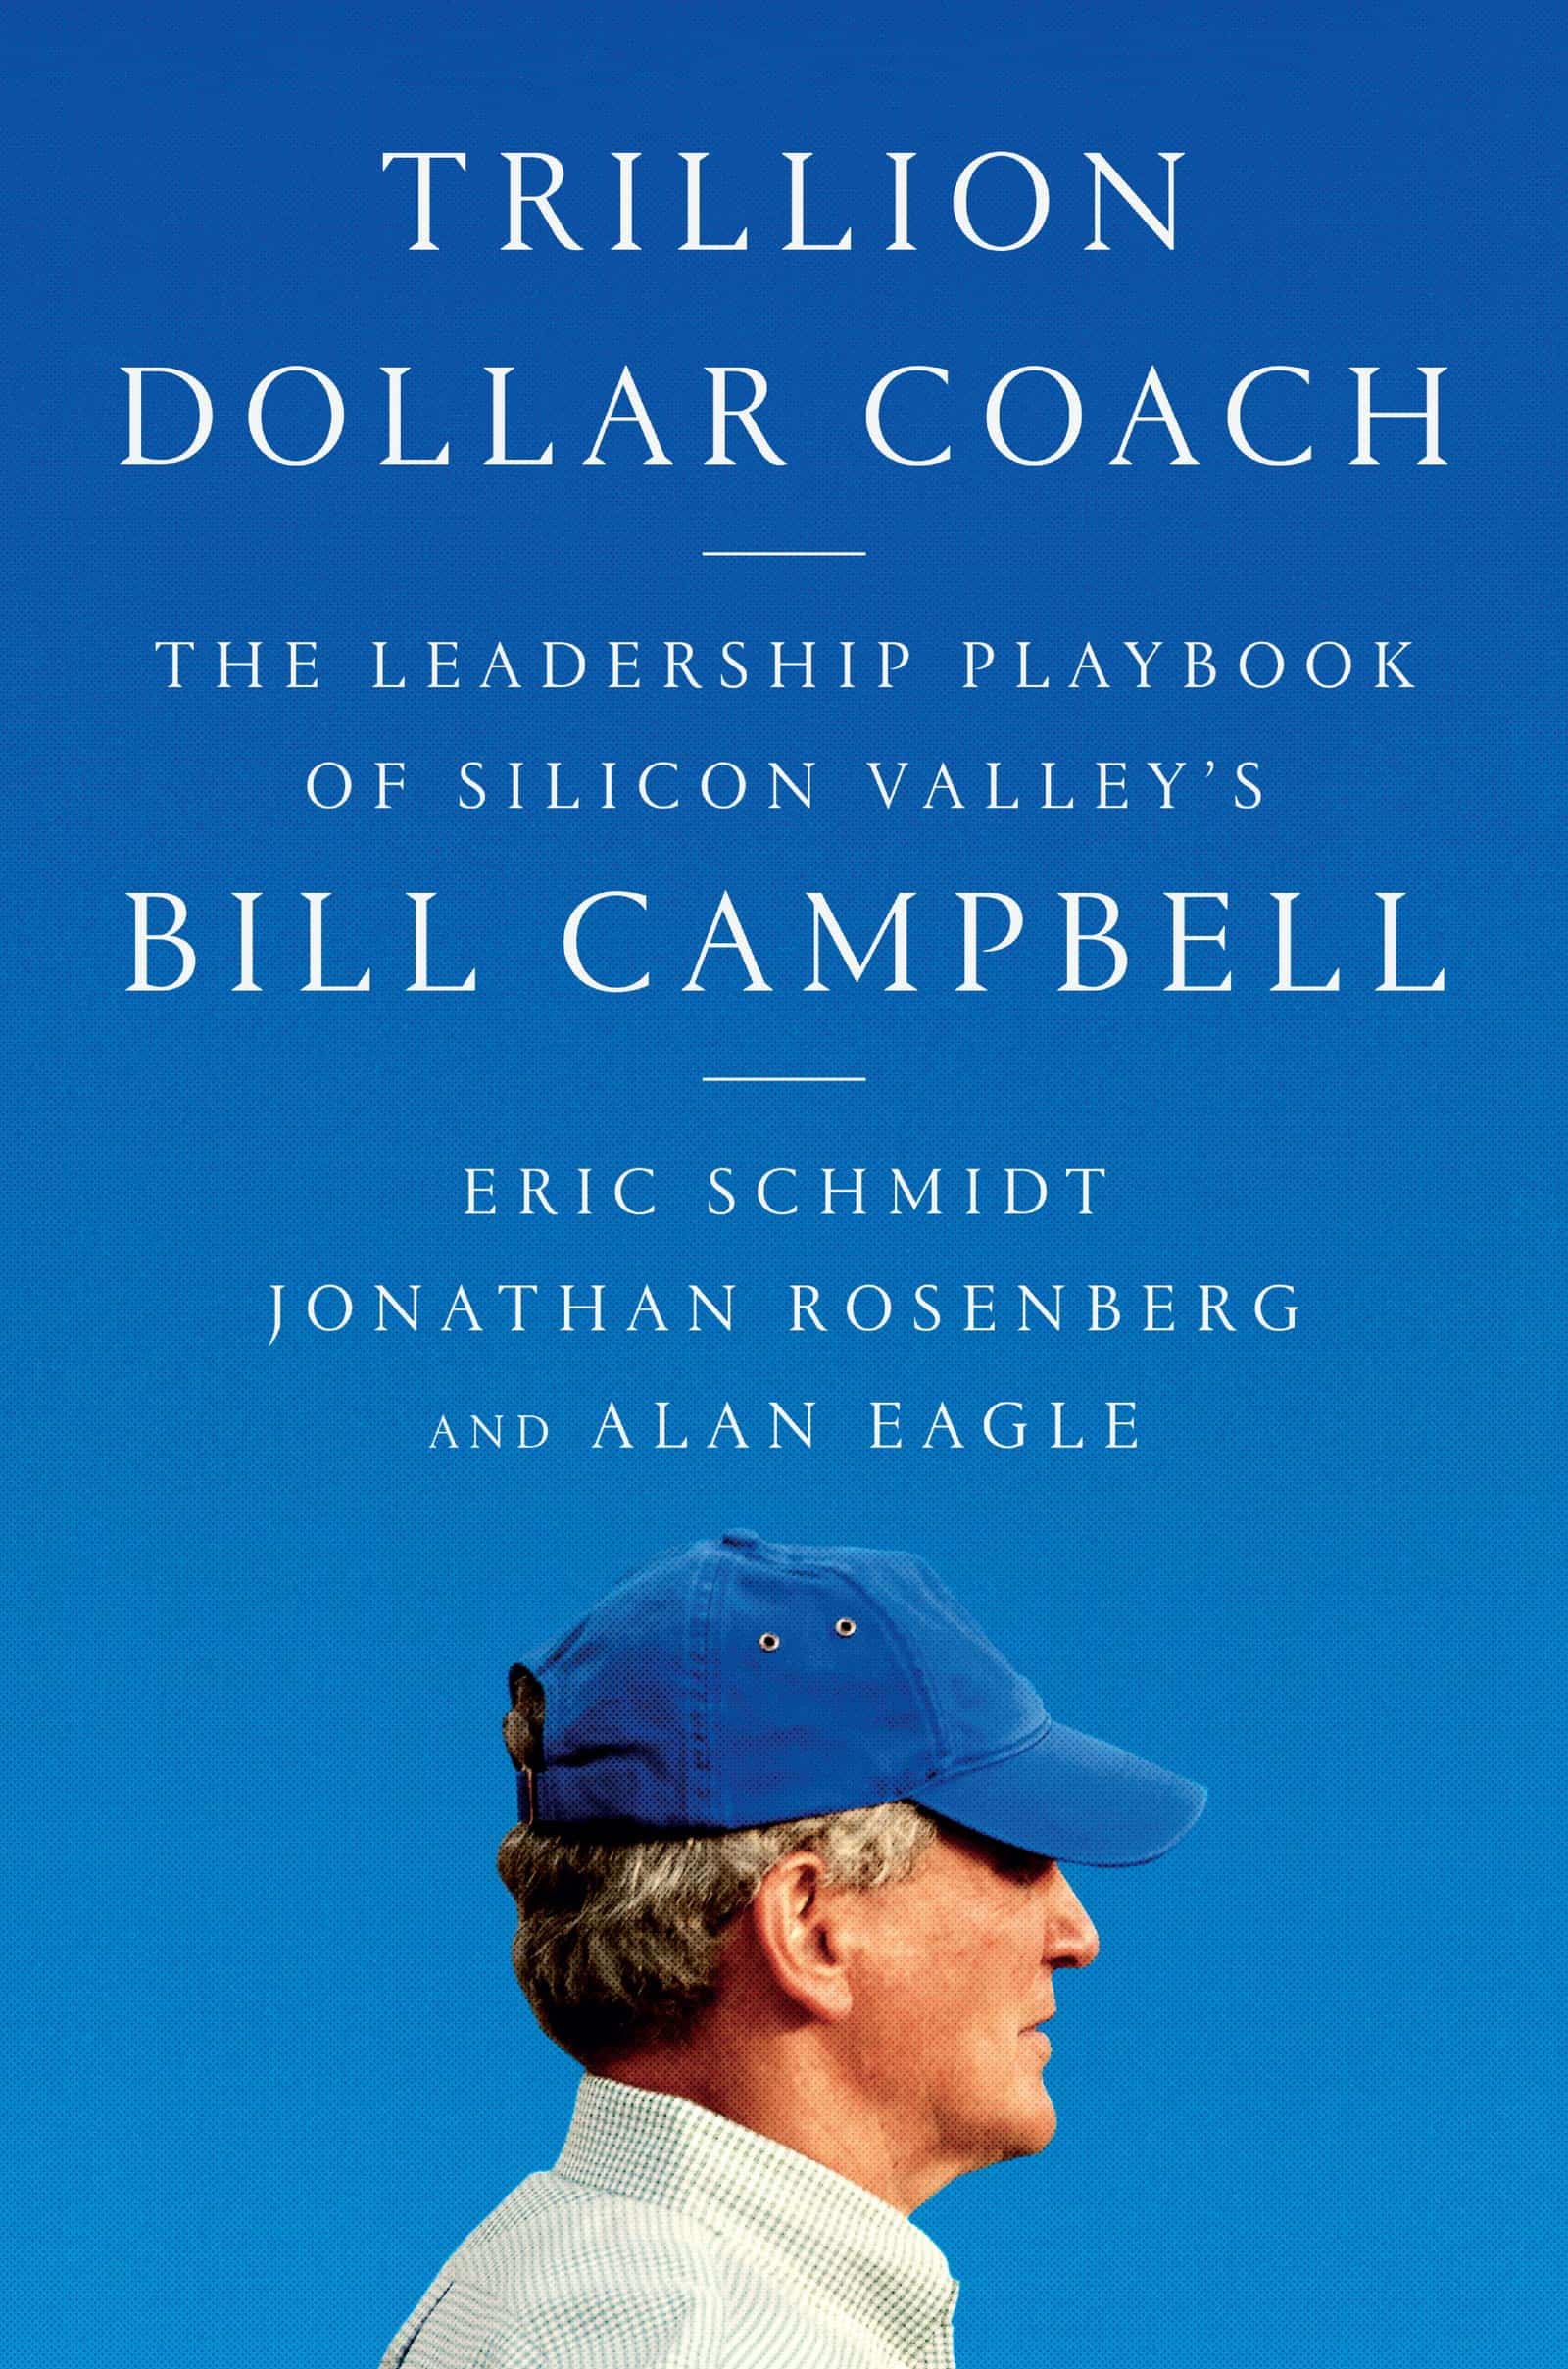 The cover of Trillion Dollar Coach